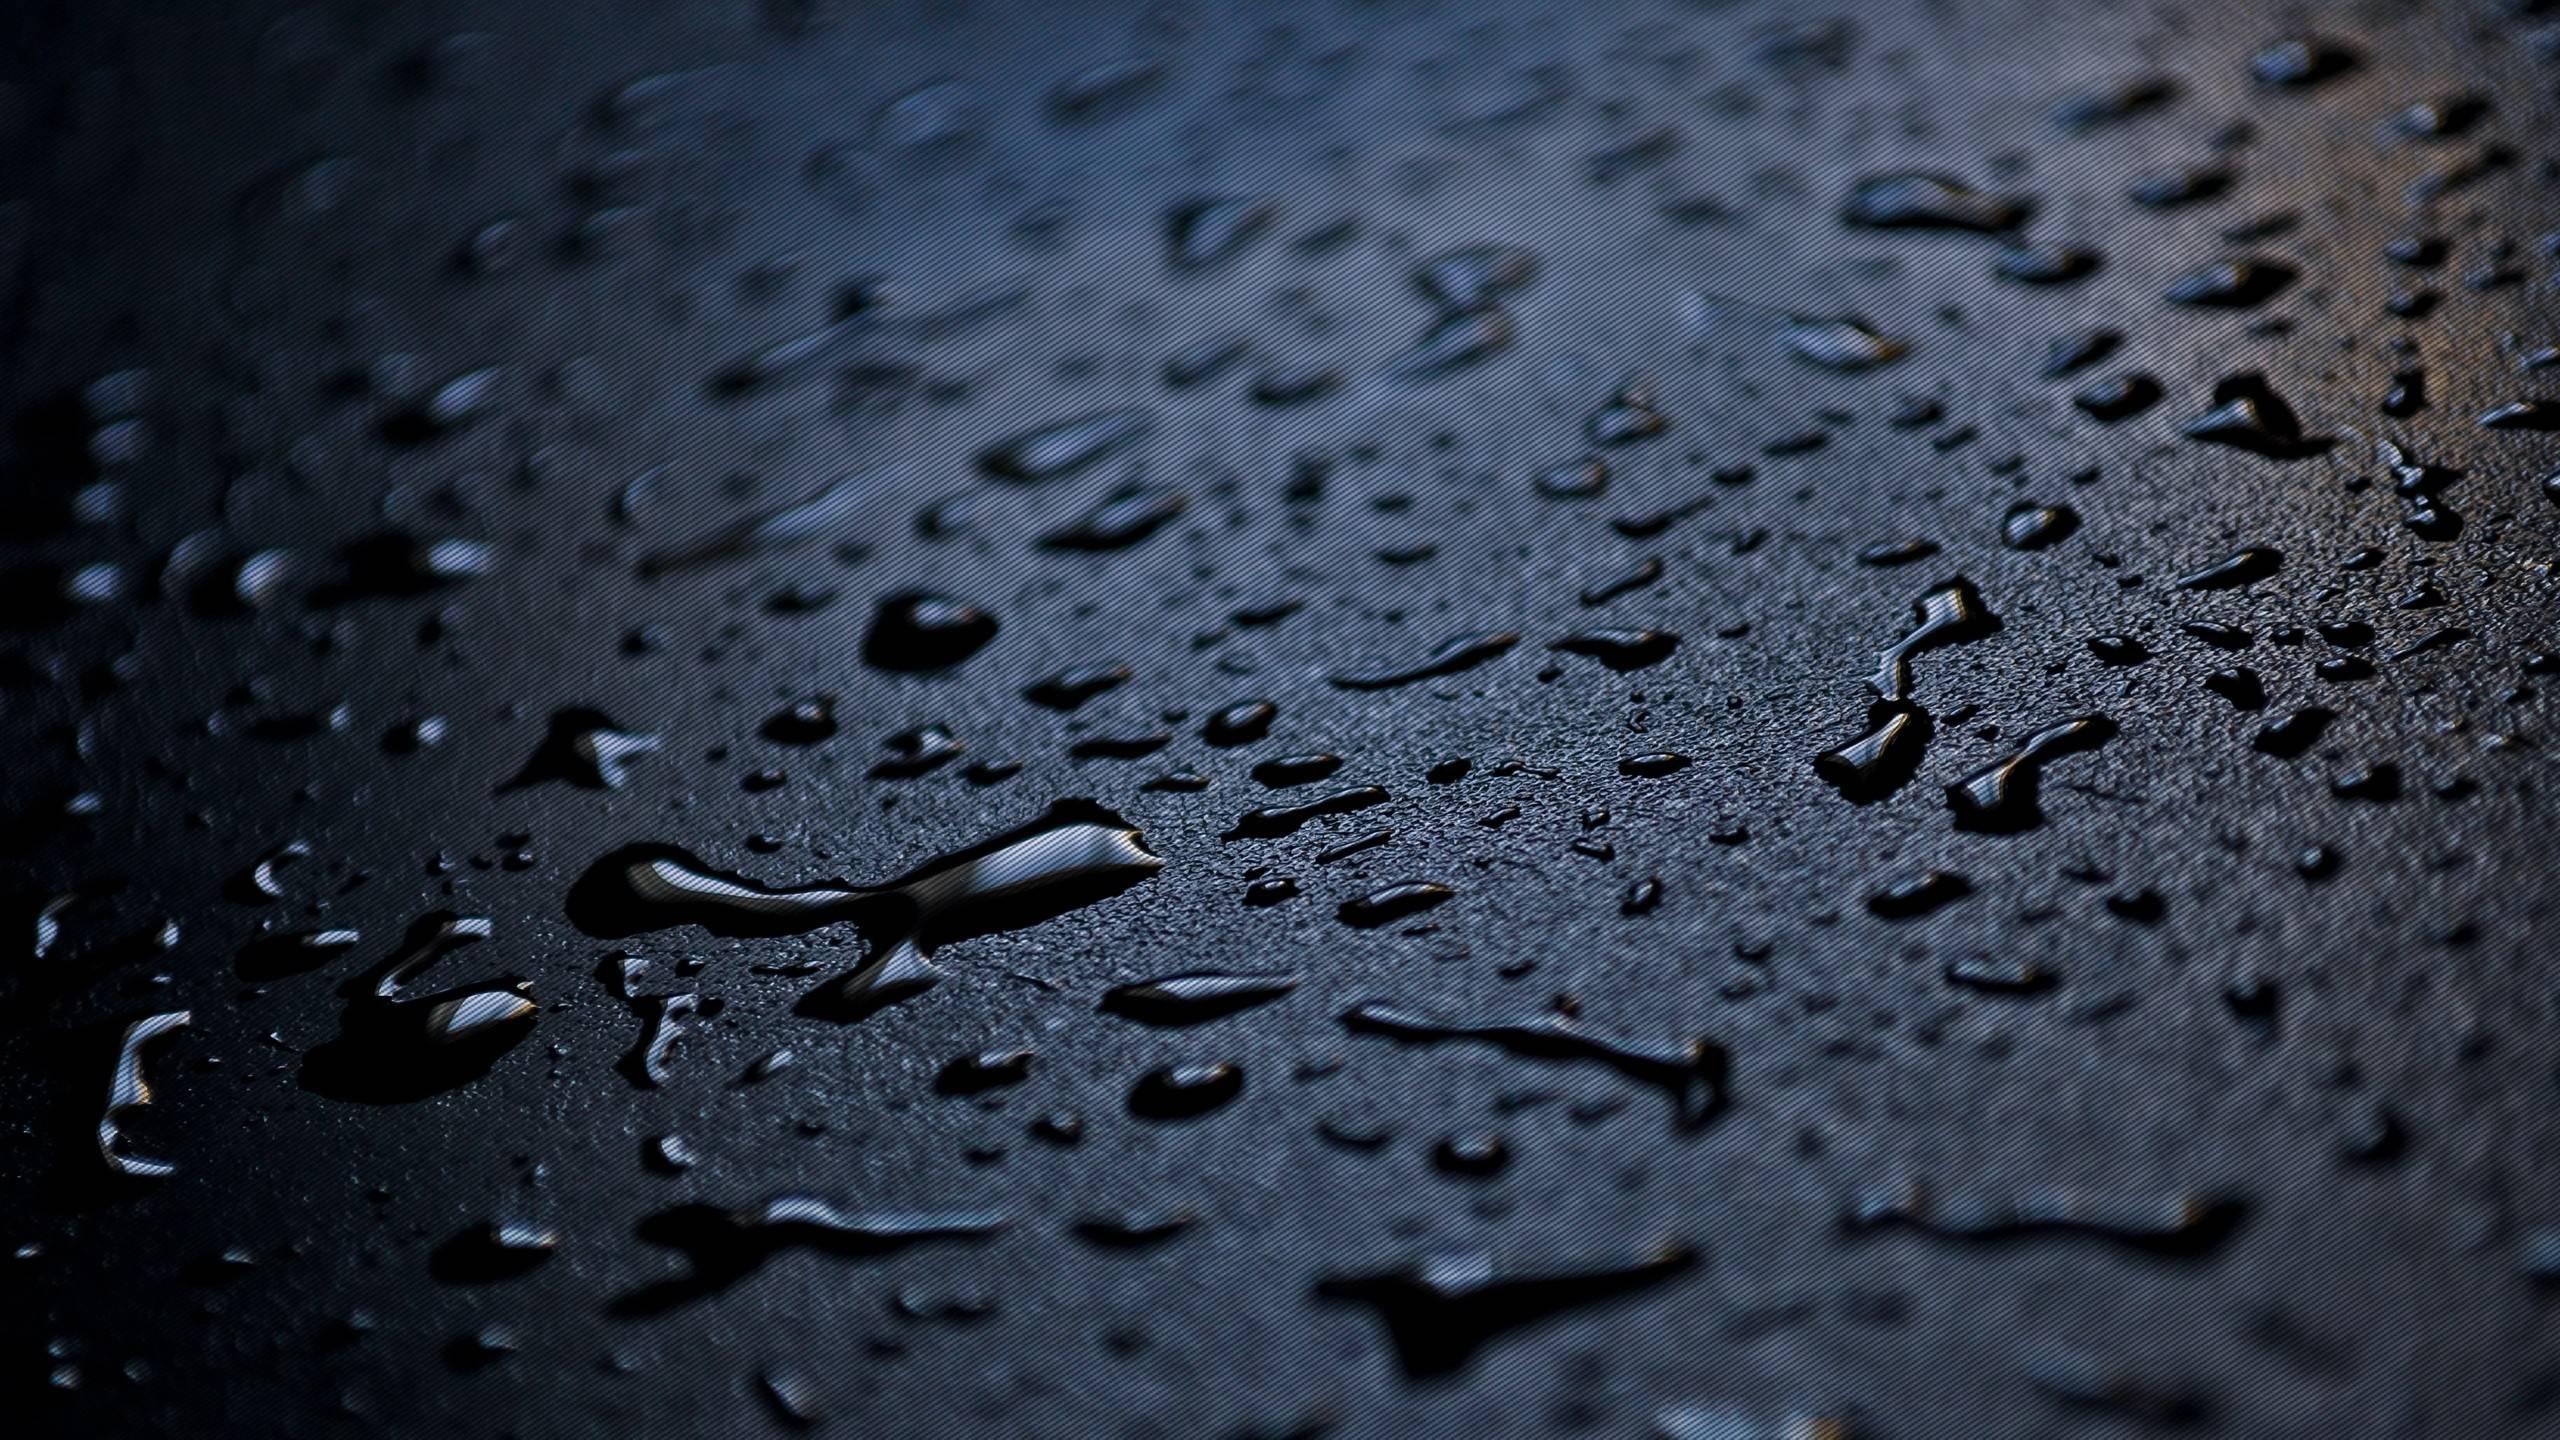 Download Raindrops Background 39887 2560x1440 px High Resolution